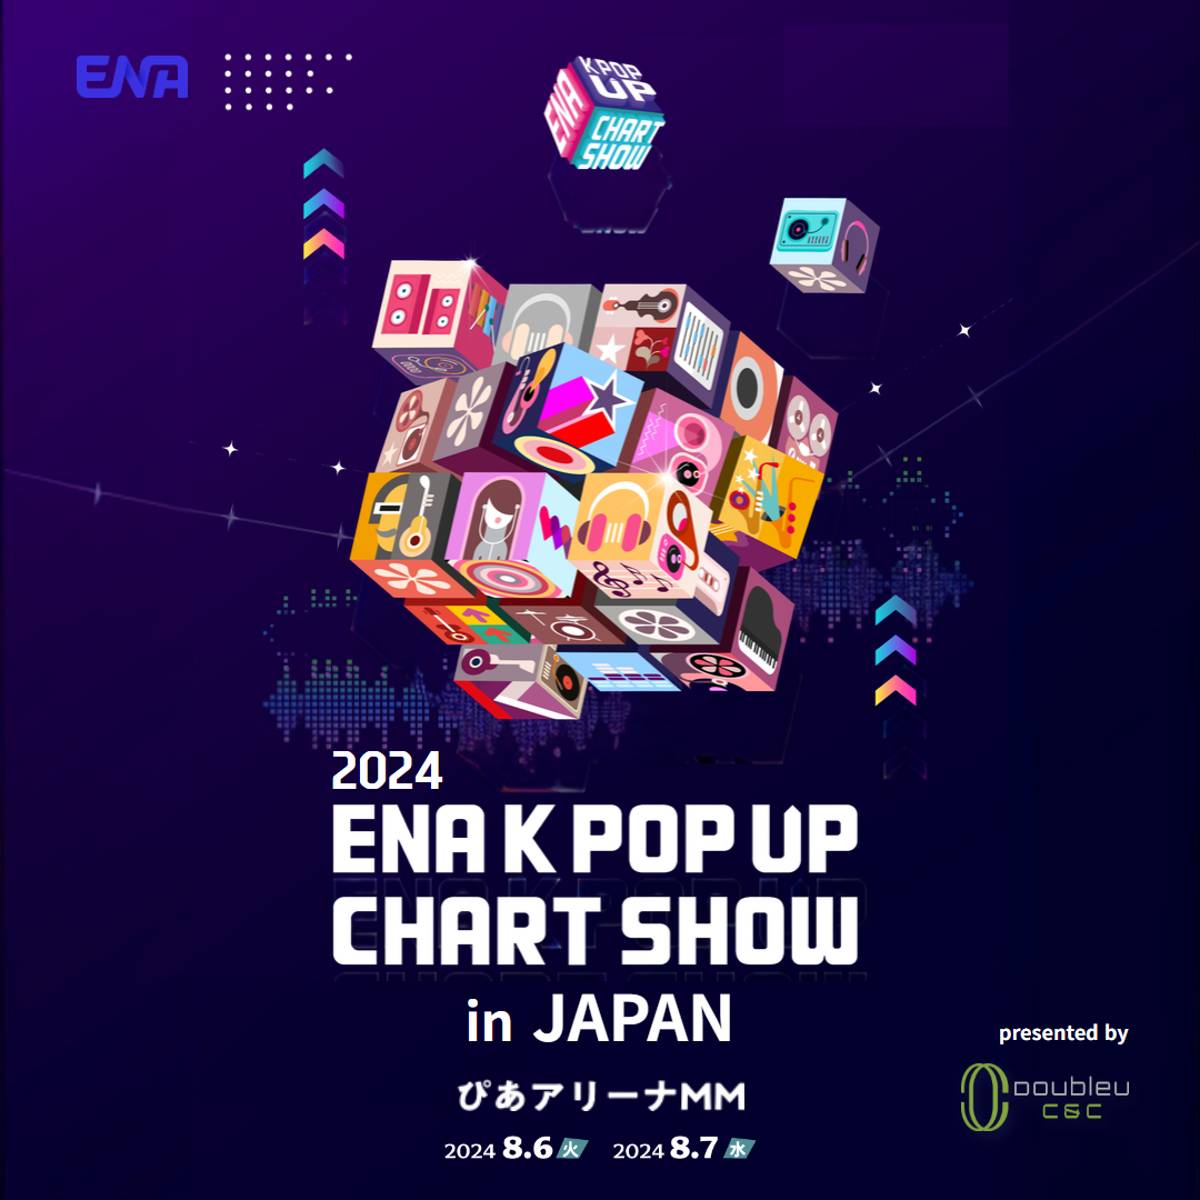 「2024 ENA K POP UP CHART SHOW IN JAPAN」